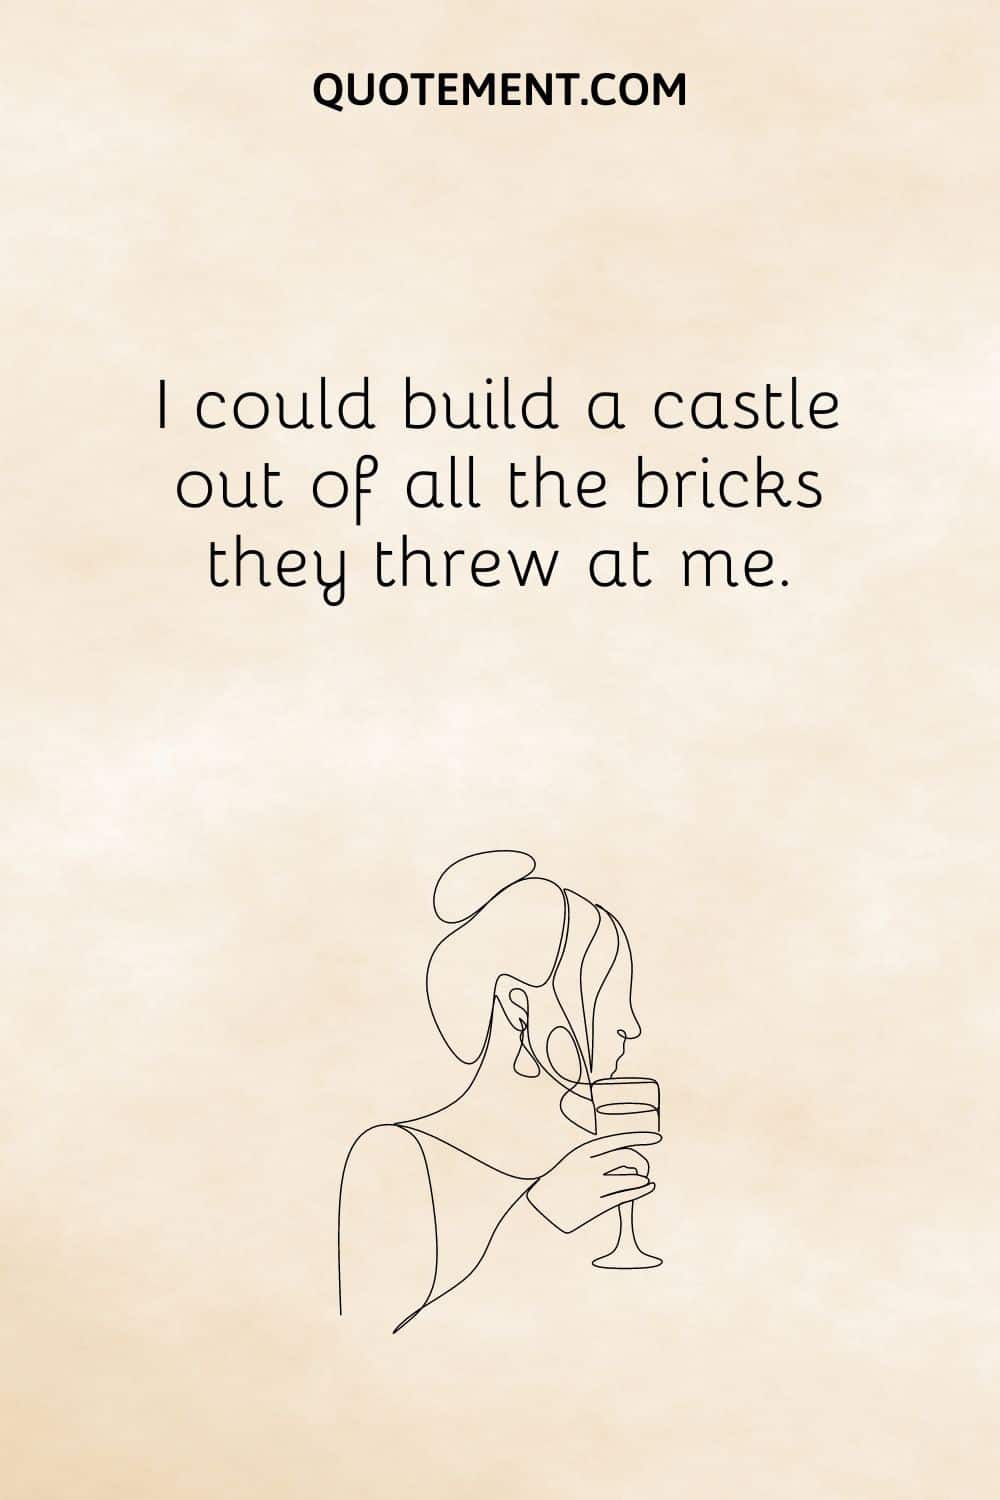 I could build a castle out of all the bricks they threw at me.